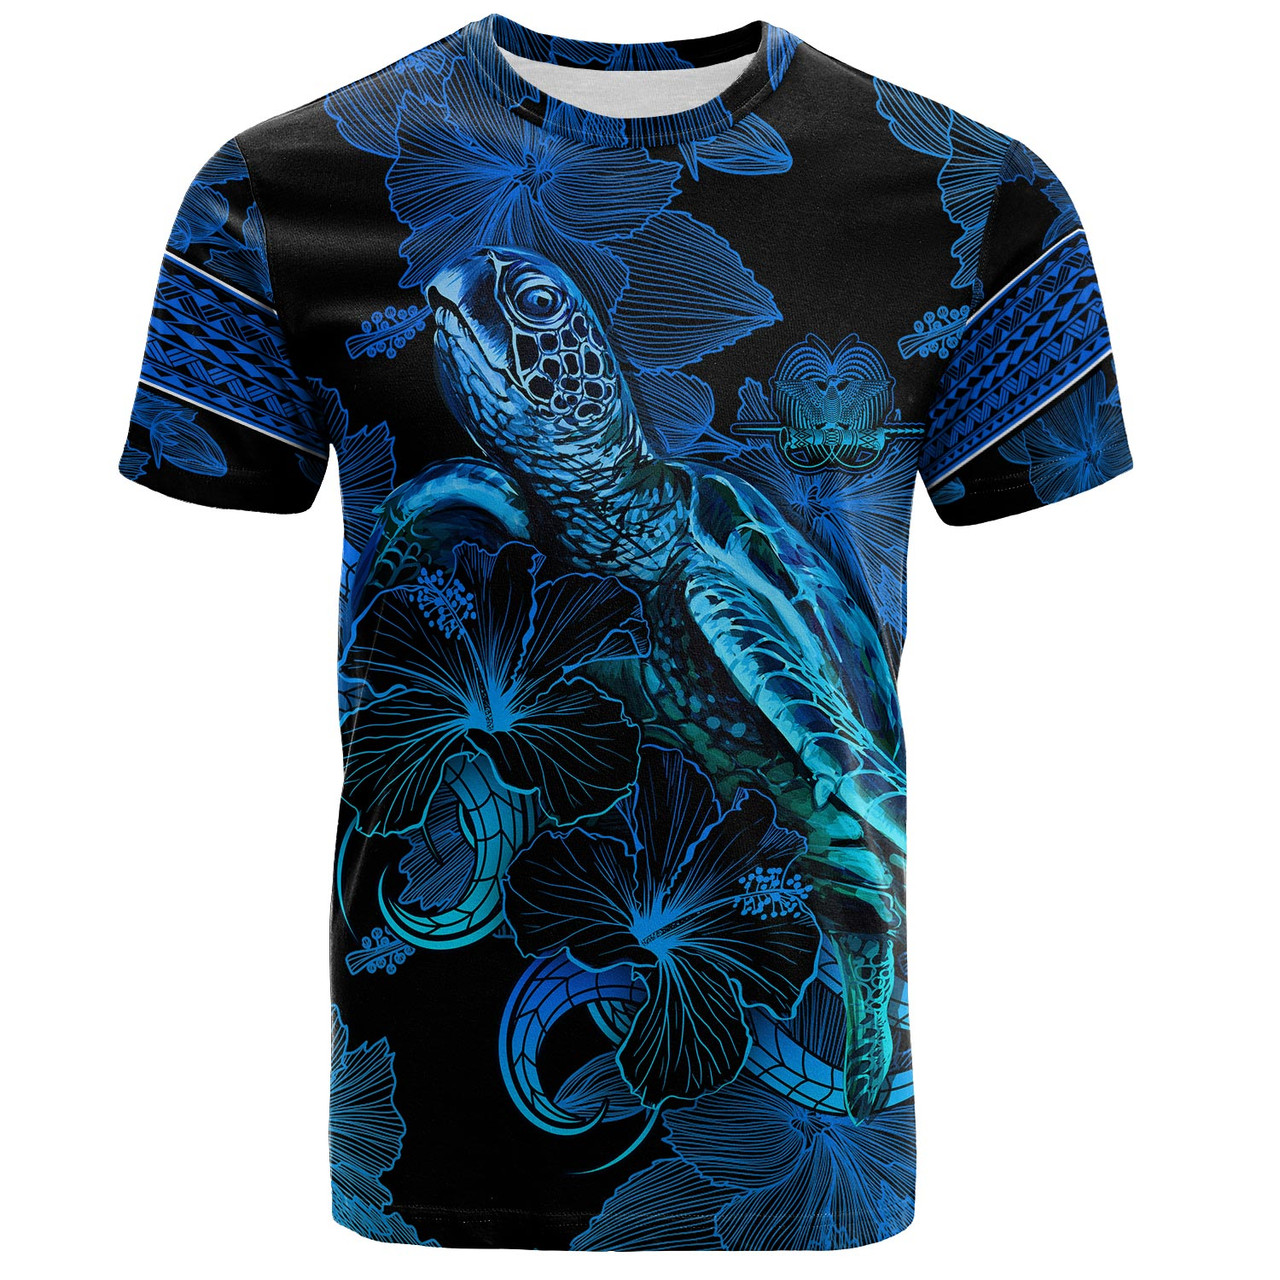 Papua New Guinea T-Shirt Sea Turtle With Blooming Hibiscus Flowers Tribal Blue